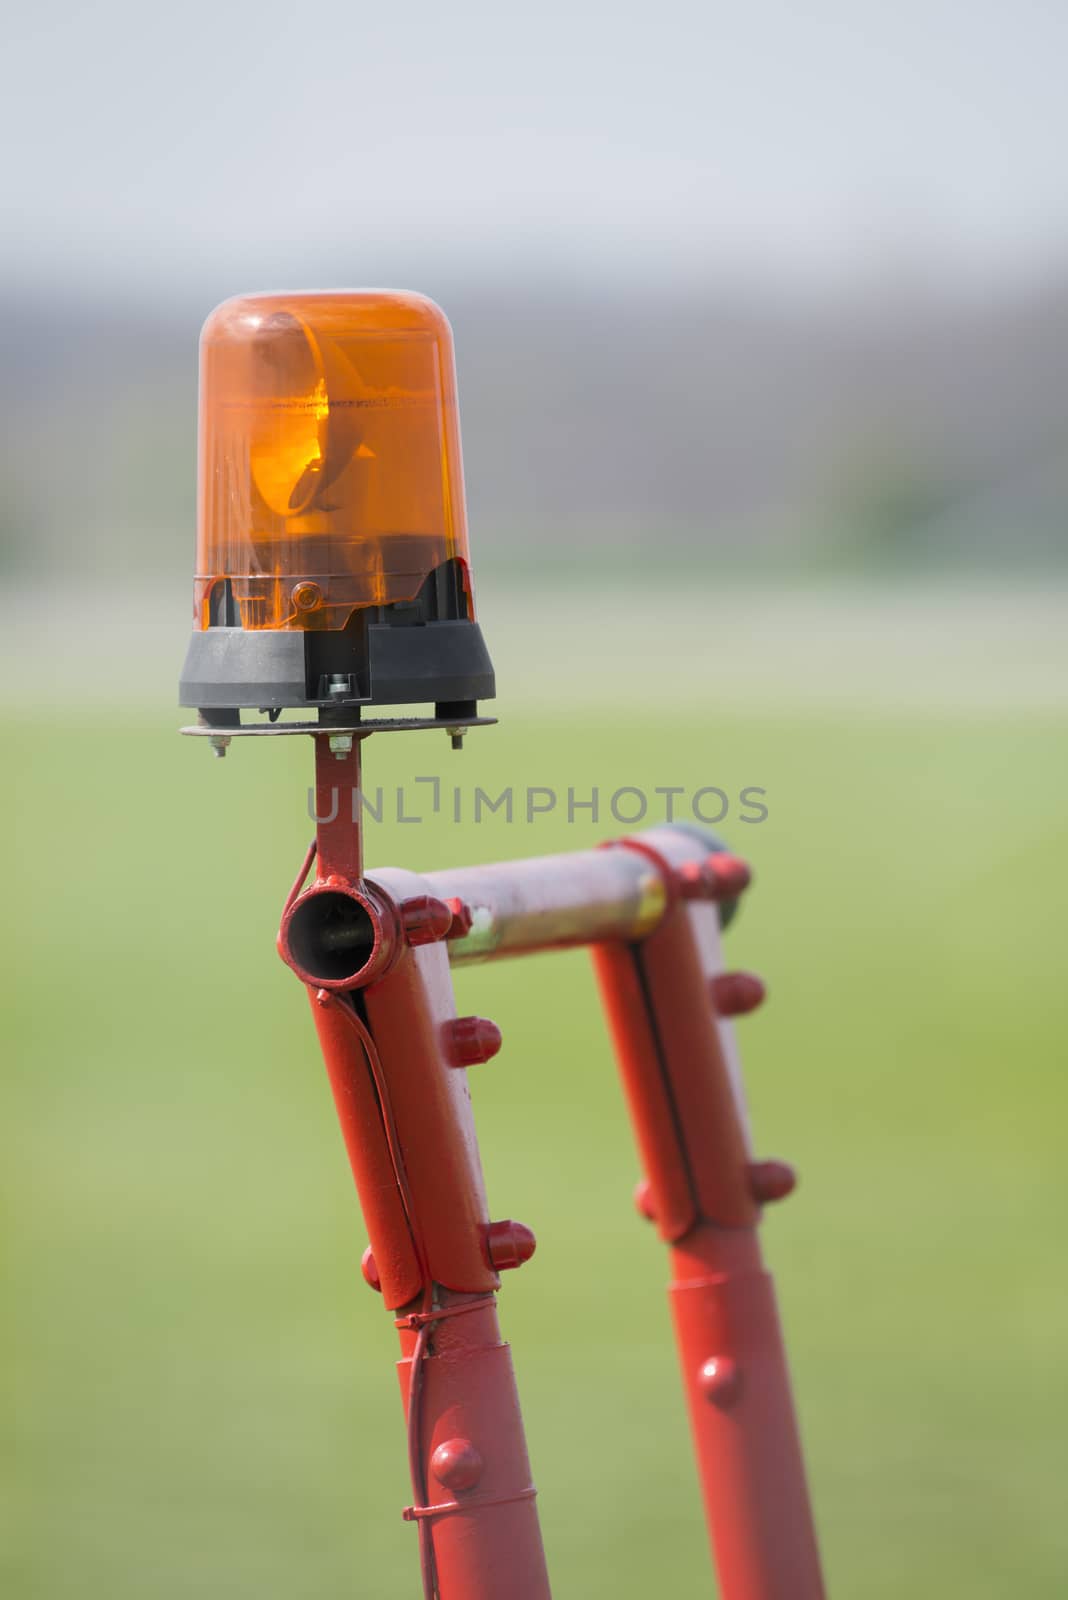 Orange flashing light on a cell red metal scaffolding
